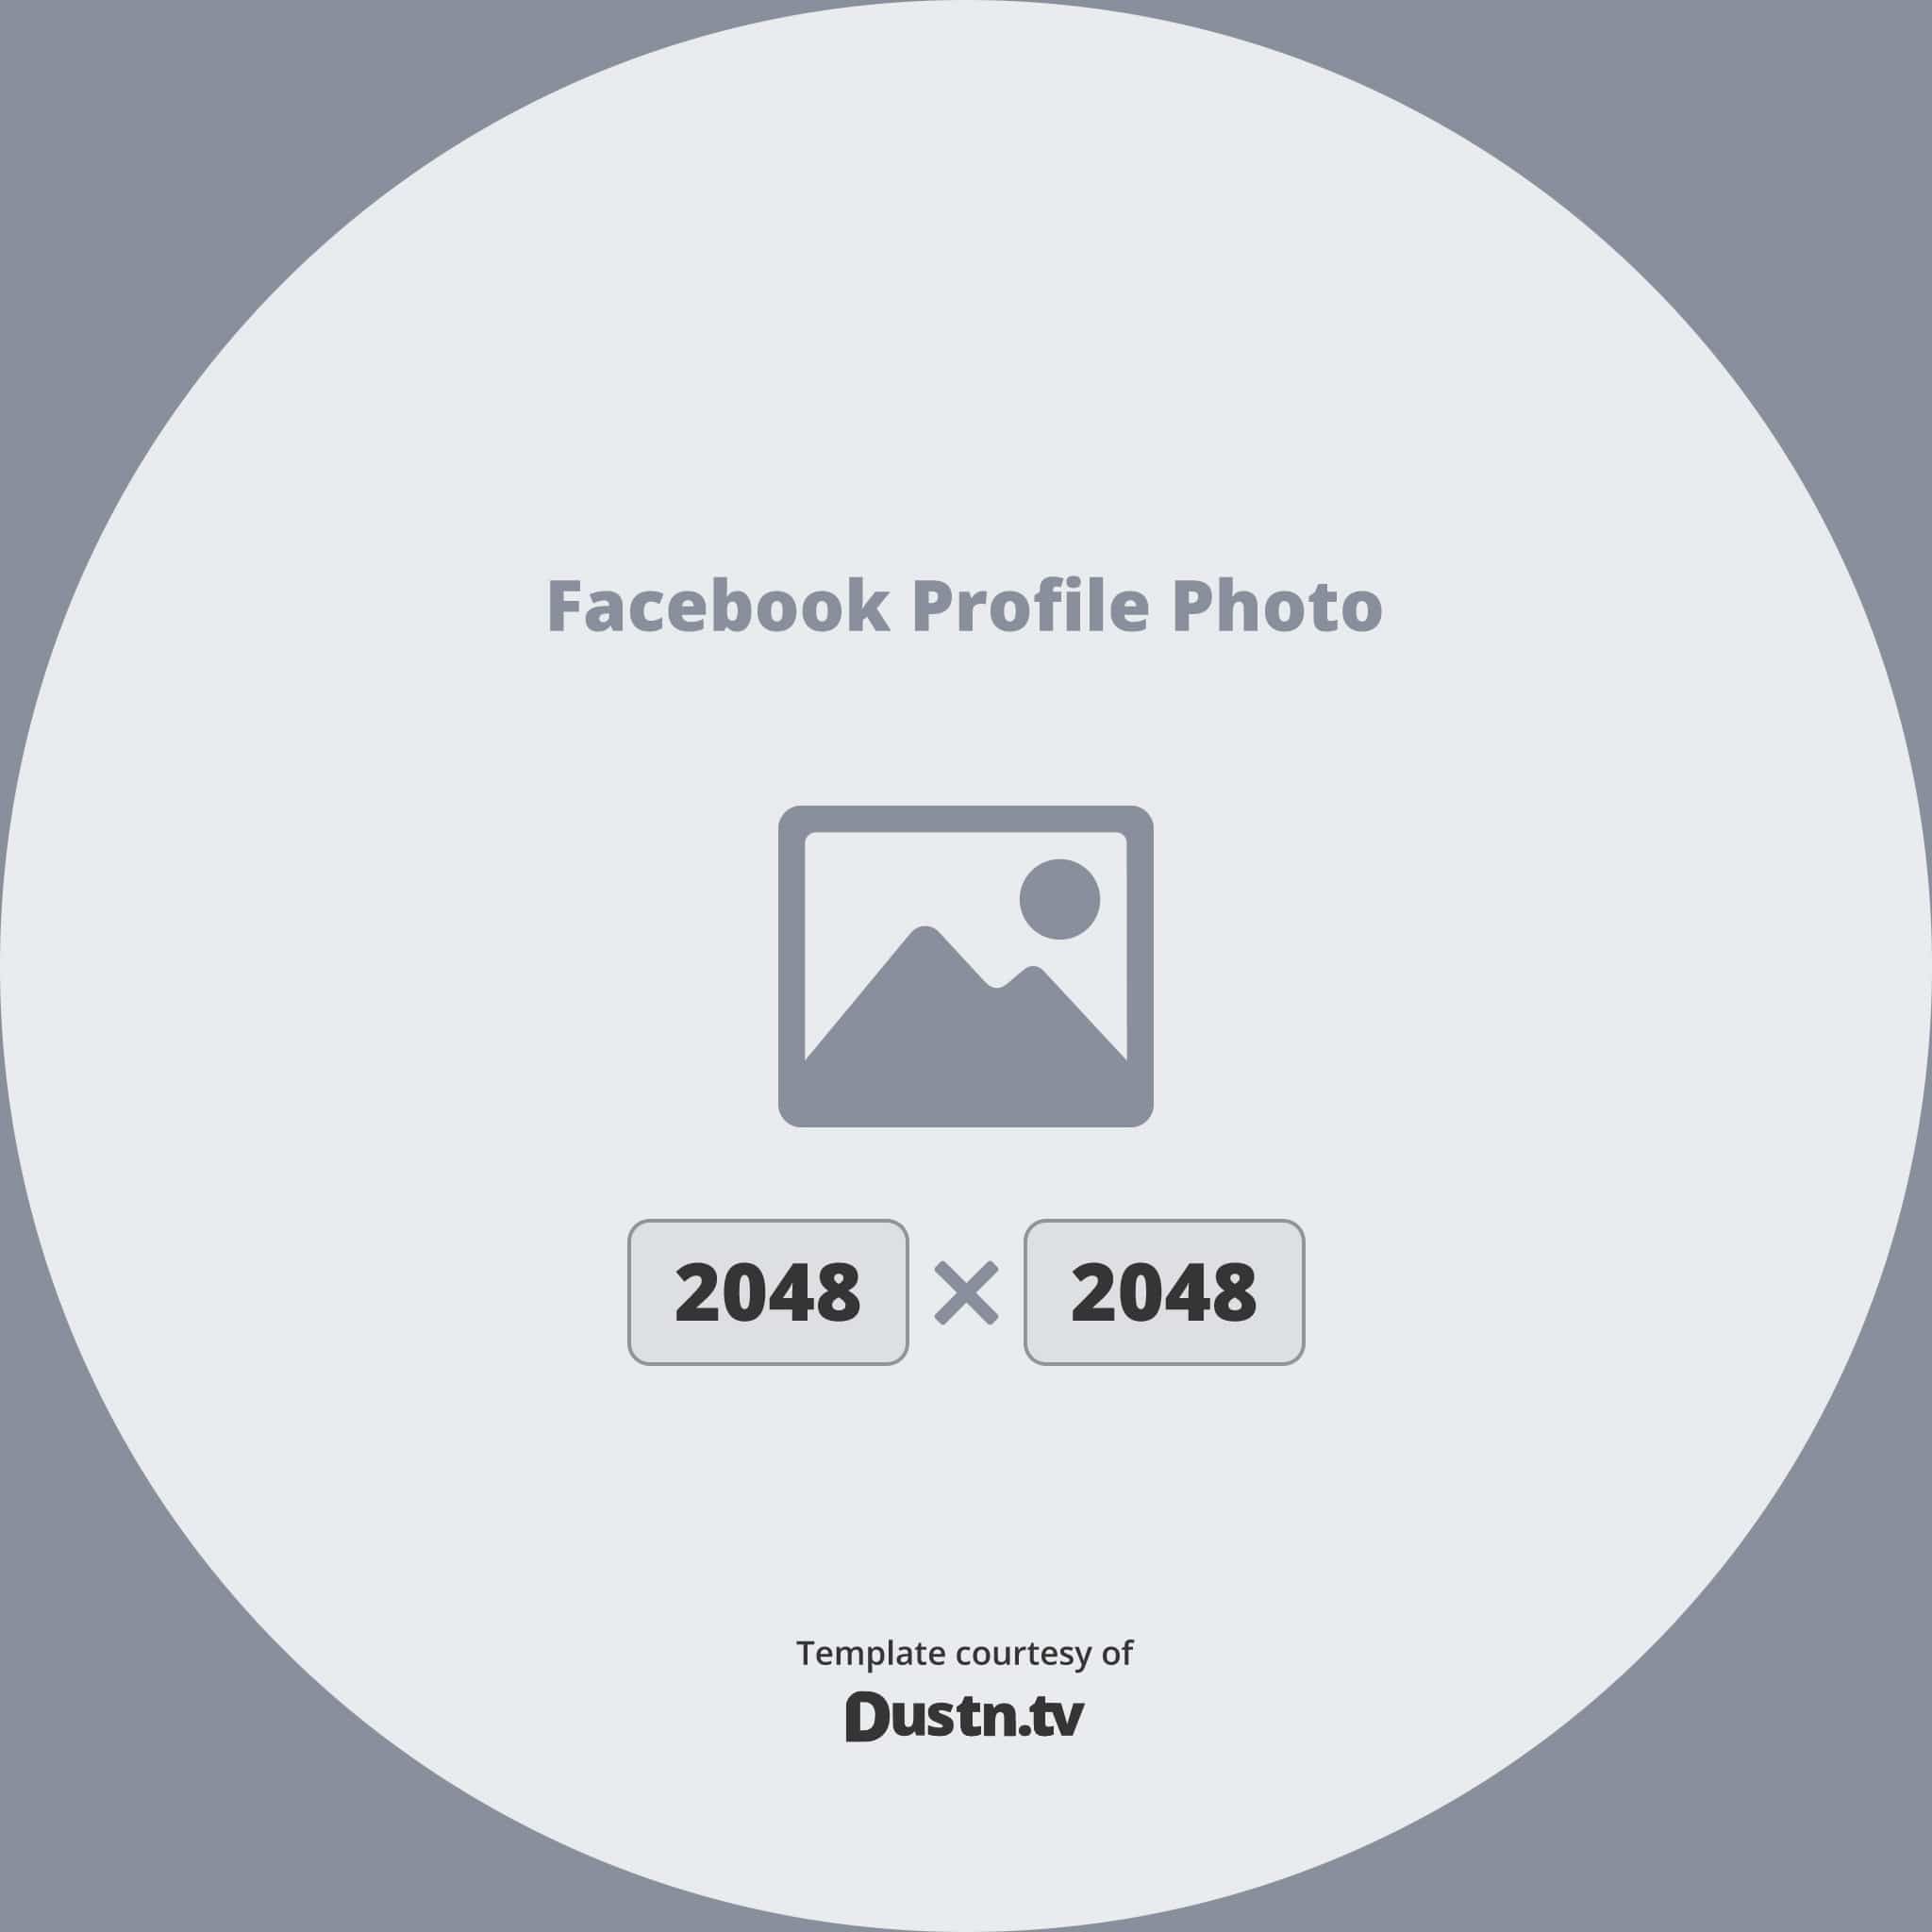 Facebook Profile Picture Size How to Change Facebook Profile Image Using  the Right Size  MySmartPrice